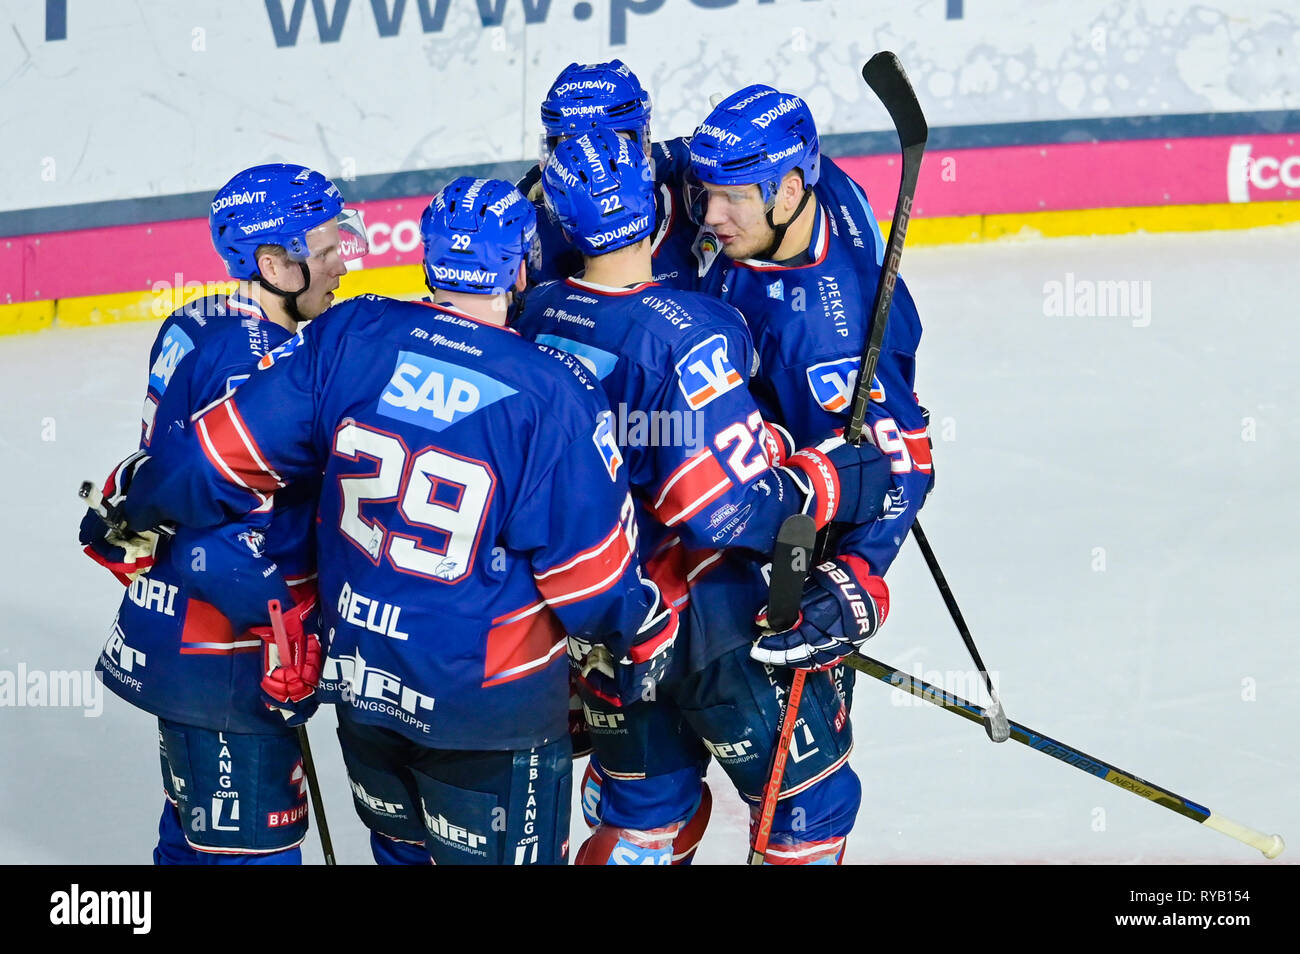 Mannheim, Germany. 13th Mar, 2019. Ice hockey: DEL, Adler Mannheim -  Nürnberg Ice Tigers, championship round, quarter finals, 1st matchday, in  the SAP Arena. Mannheim's team cheers on the goal to the